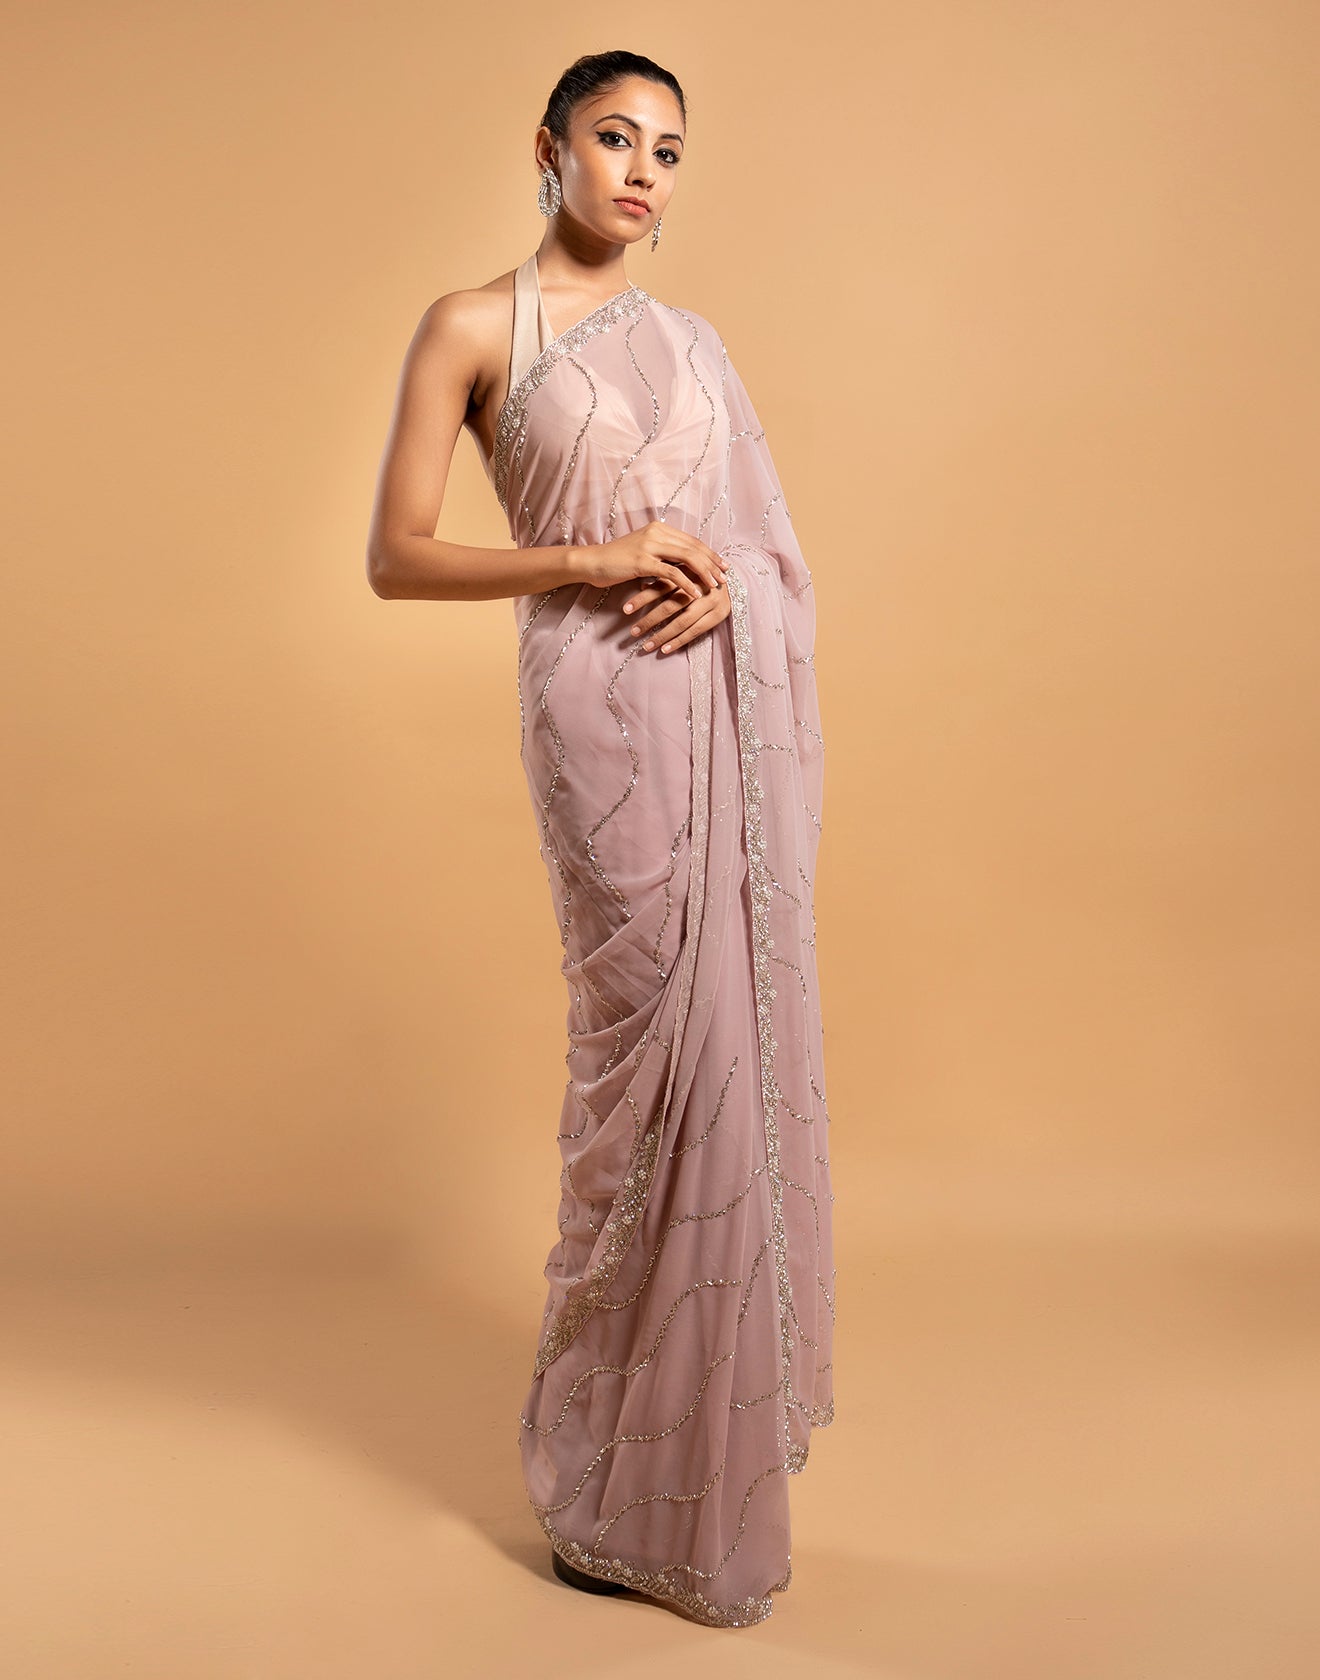 Pastel Pink Saree With Cutwork Embroidery Detailing